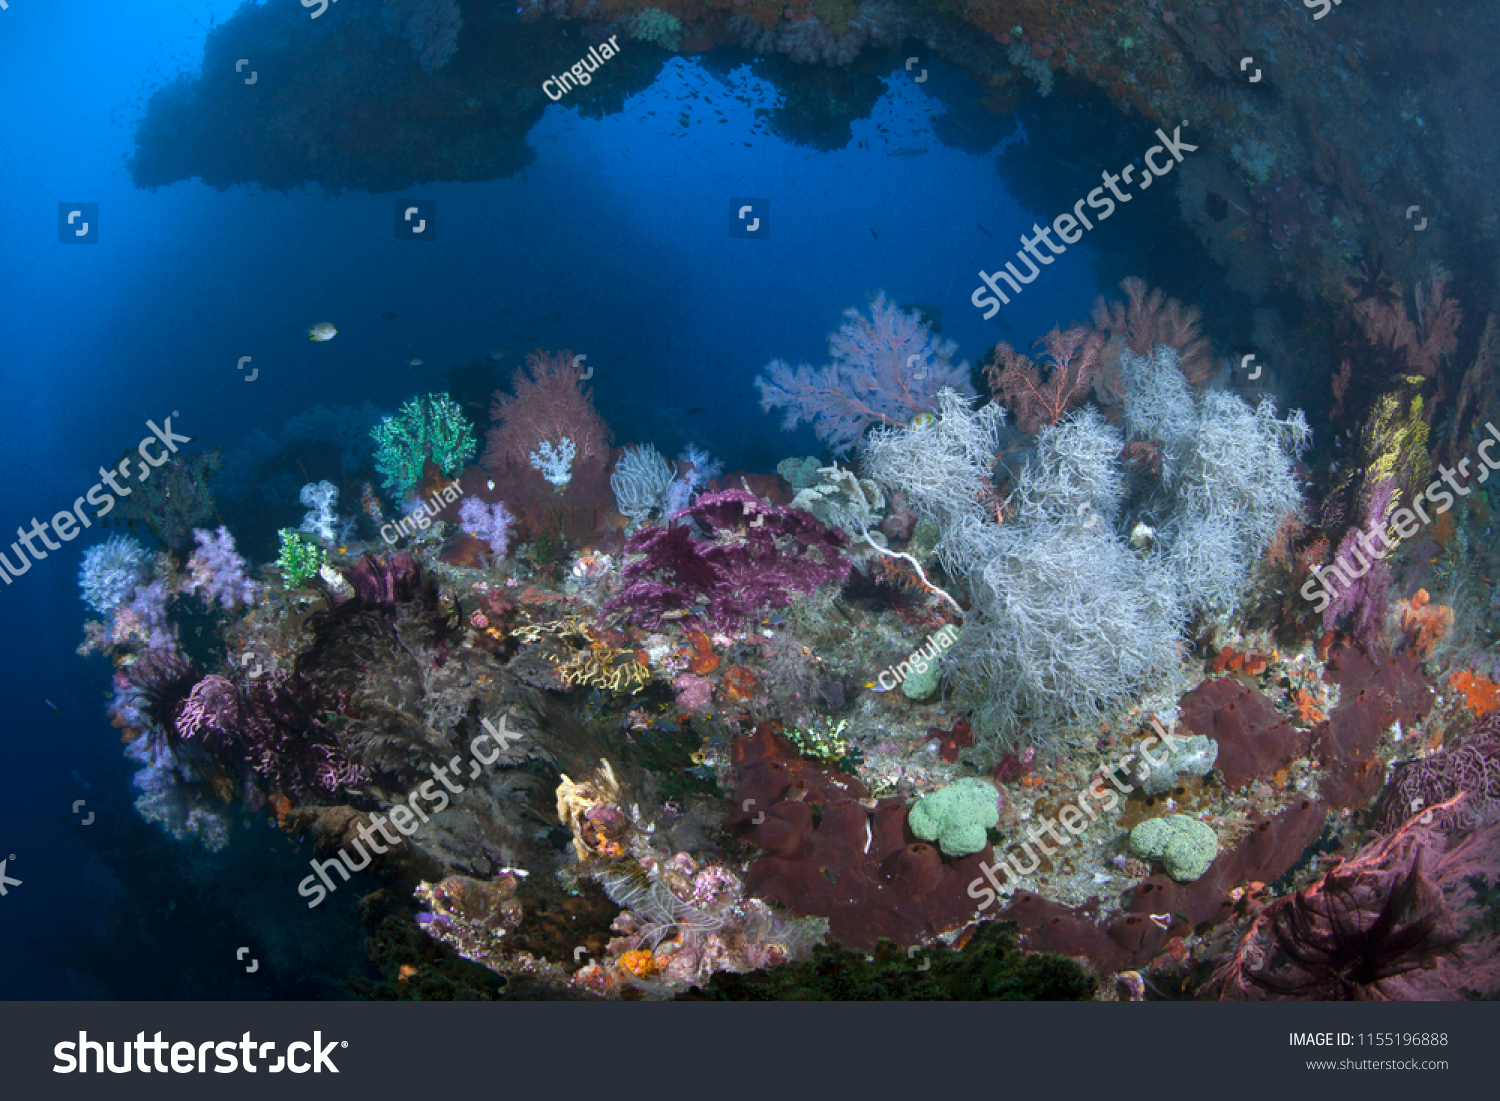 Vibrant coral reef on the ledge of a deep undersea wall. Raja Ampat, Indonesia.  #1155196888